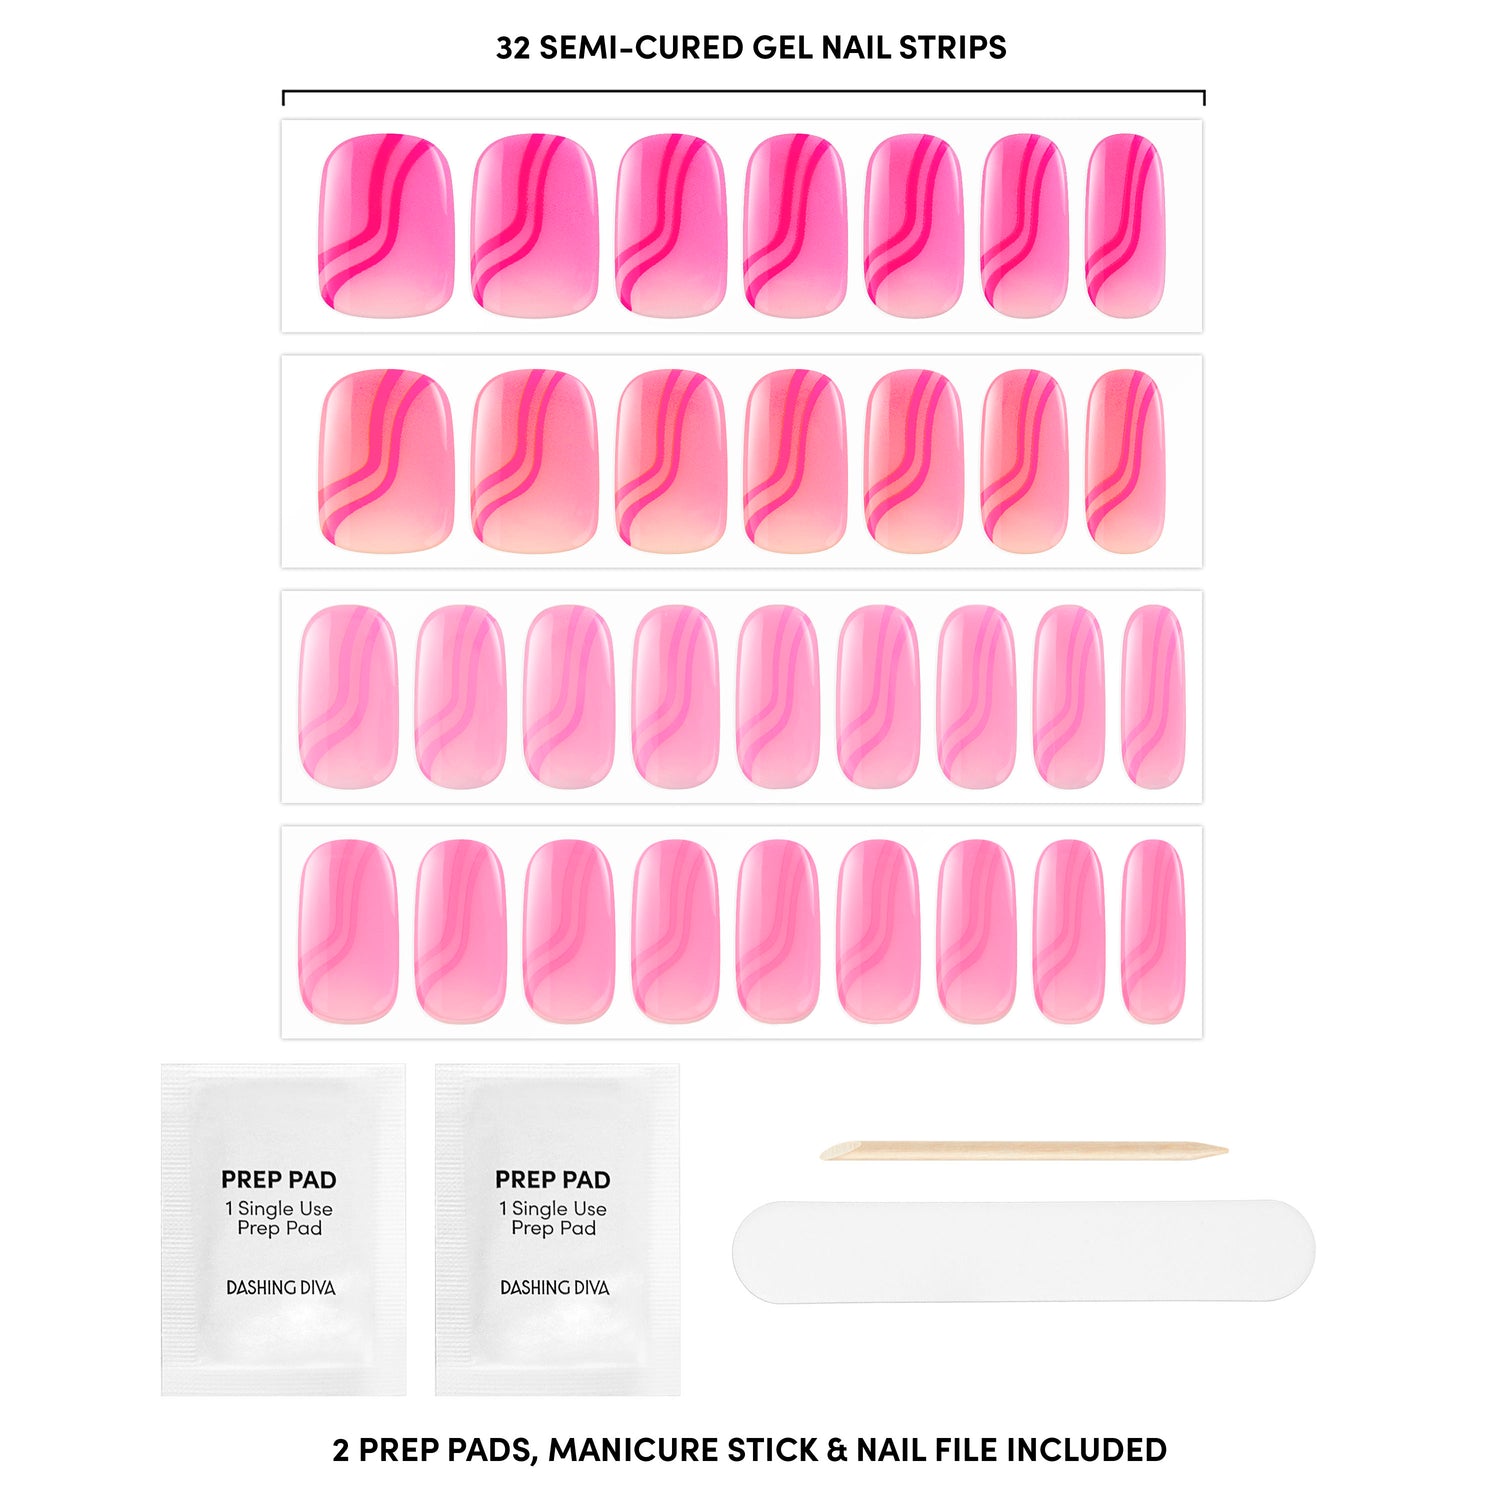 Multi-shade pink gel nail strips featuring wavy line art & ombré accents with mega volume & maximum shine.